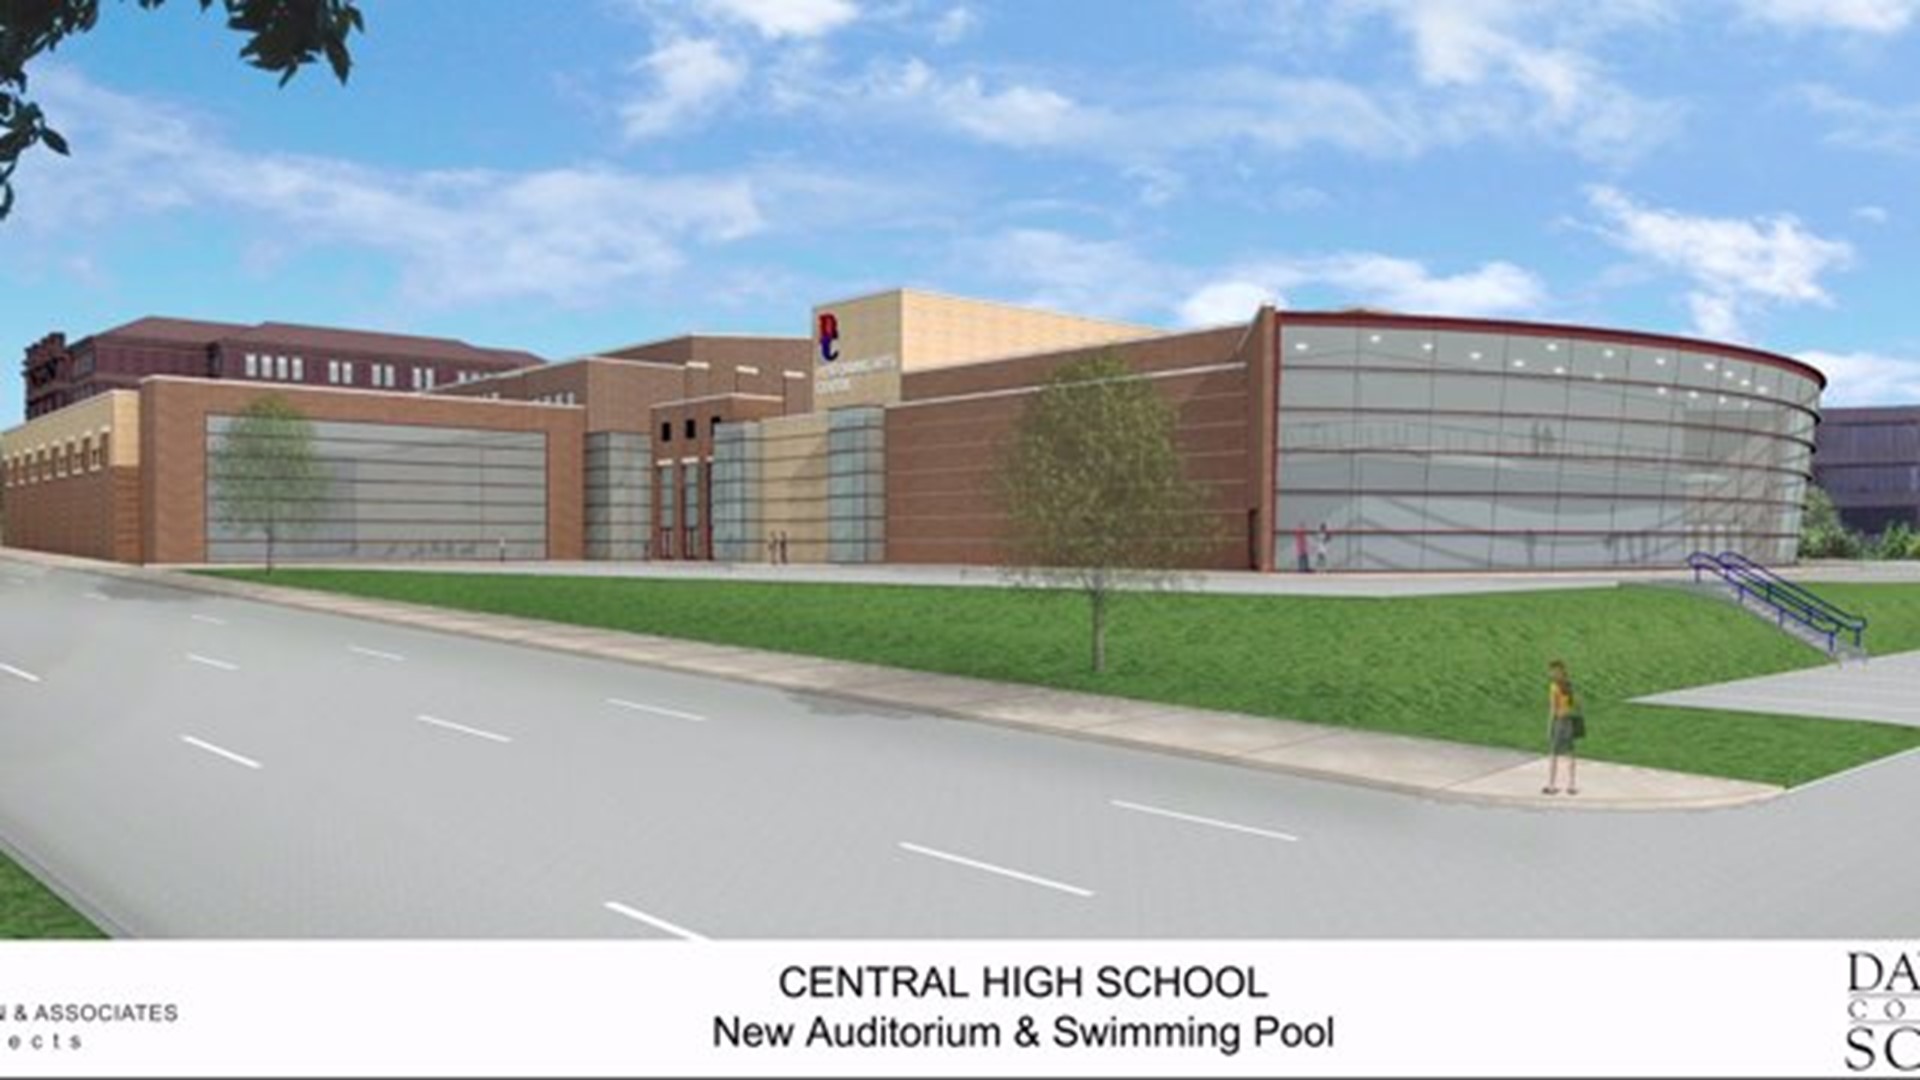 Central High School breaks ground on $21 milion dollar expansion